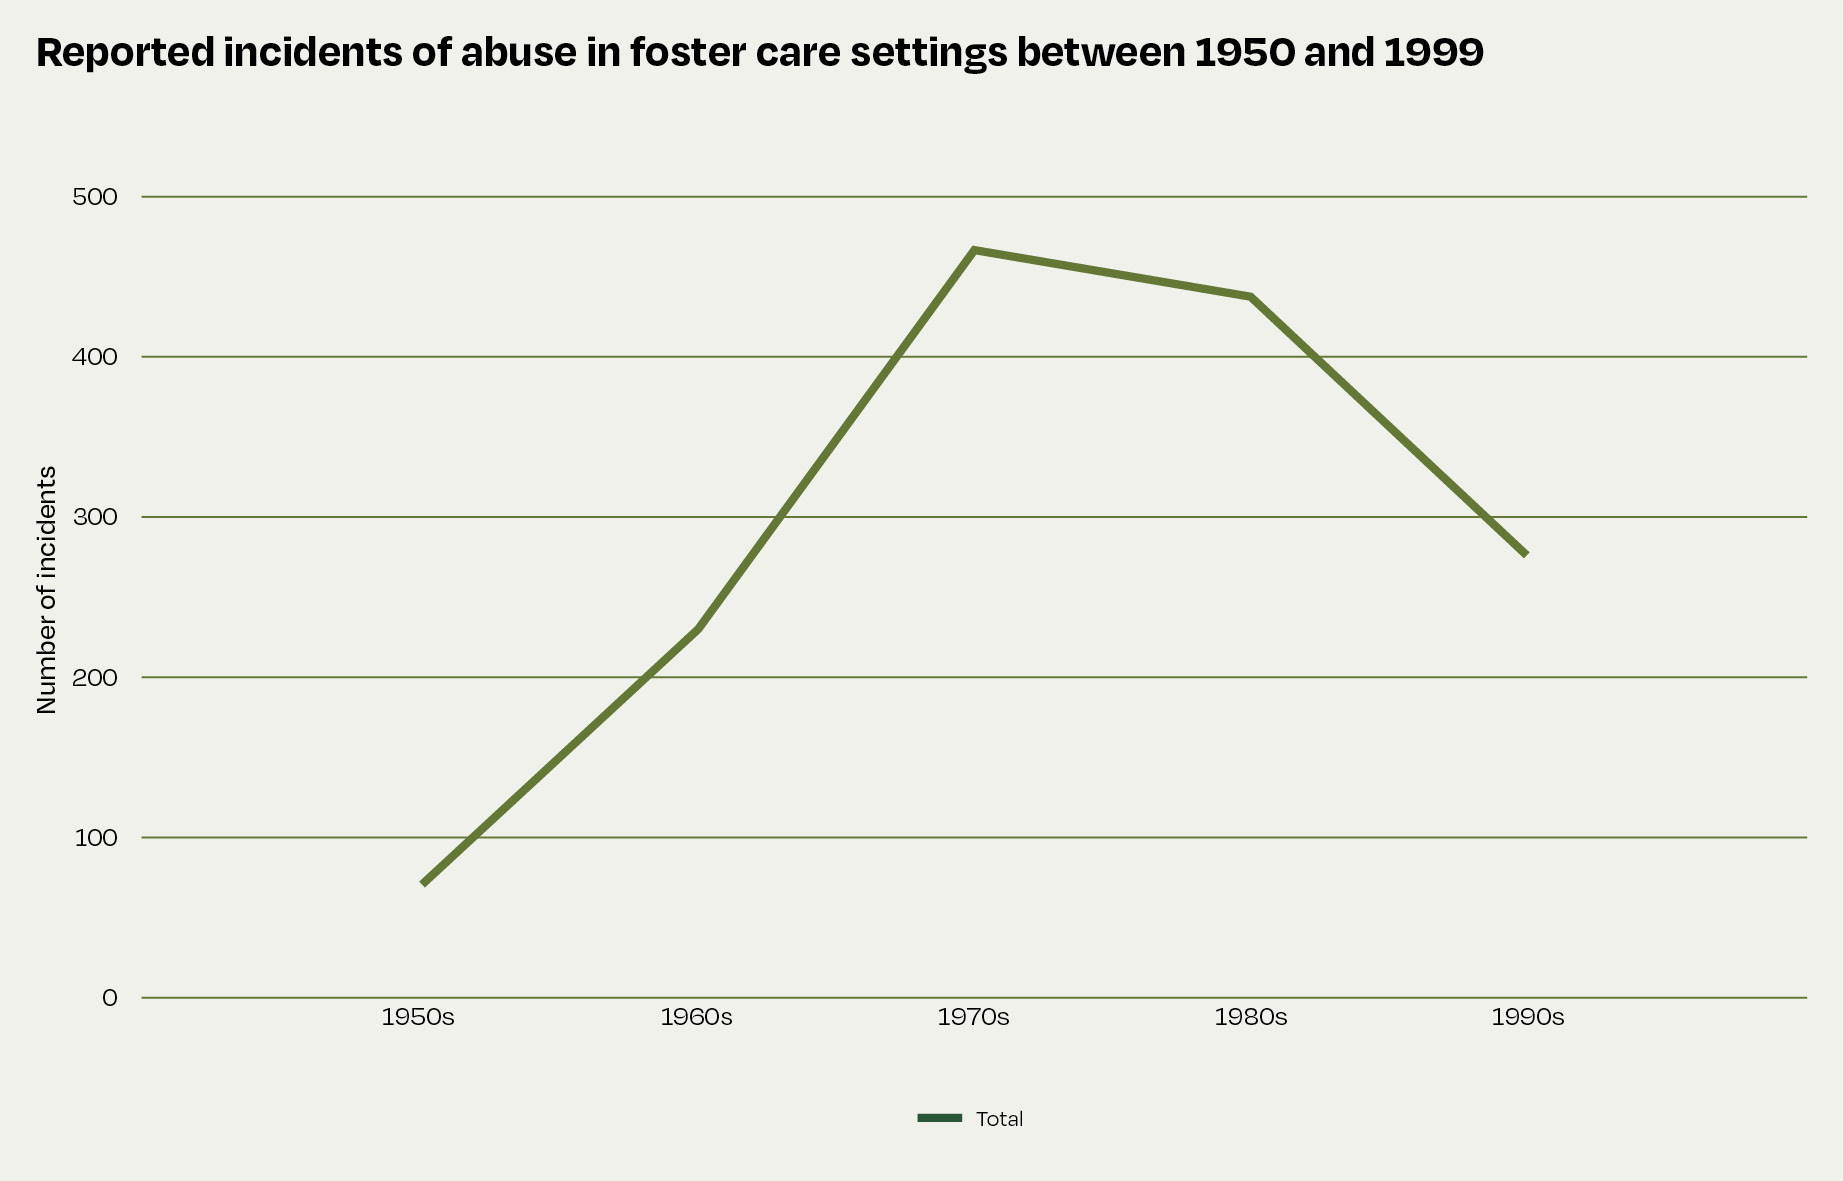 This line graph shows the number of abuse incidents reported in foster care settings between 1950 and 1999. During the 1950s, 71 incidents were reported. This rose to 230 incidents during the 1960s, then peaked at 466 incidents during the 1970s. Incidents declined slightly to 437 during the 1980s, then to 134 by the 1990s. 